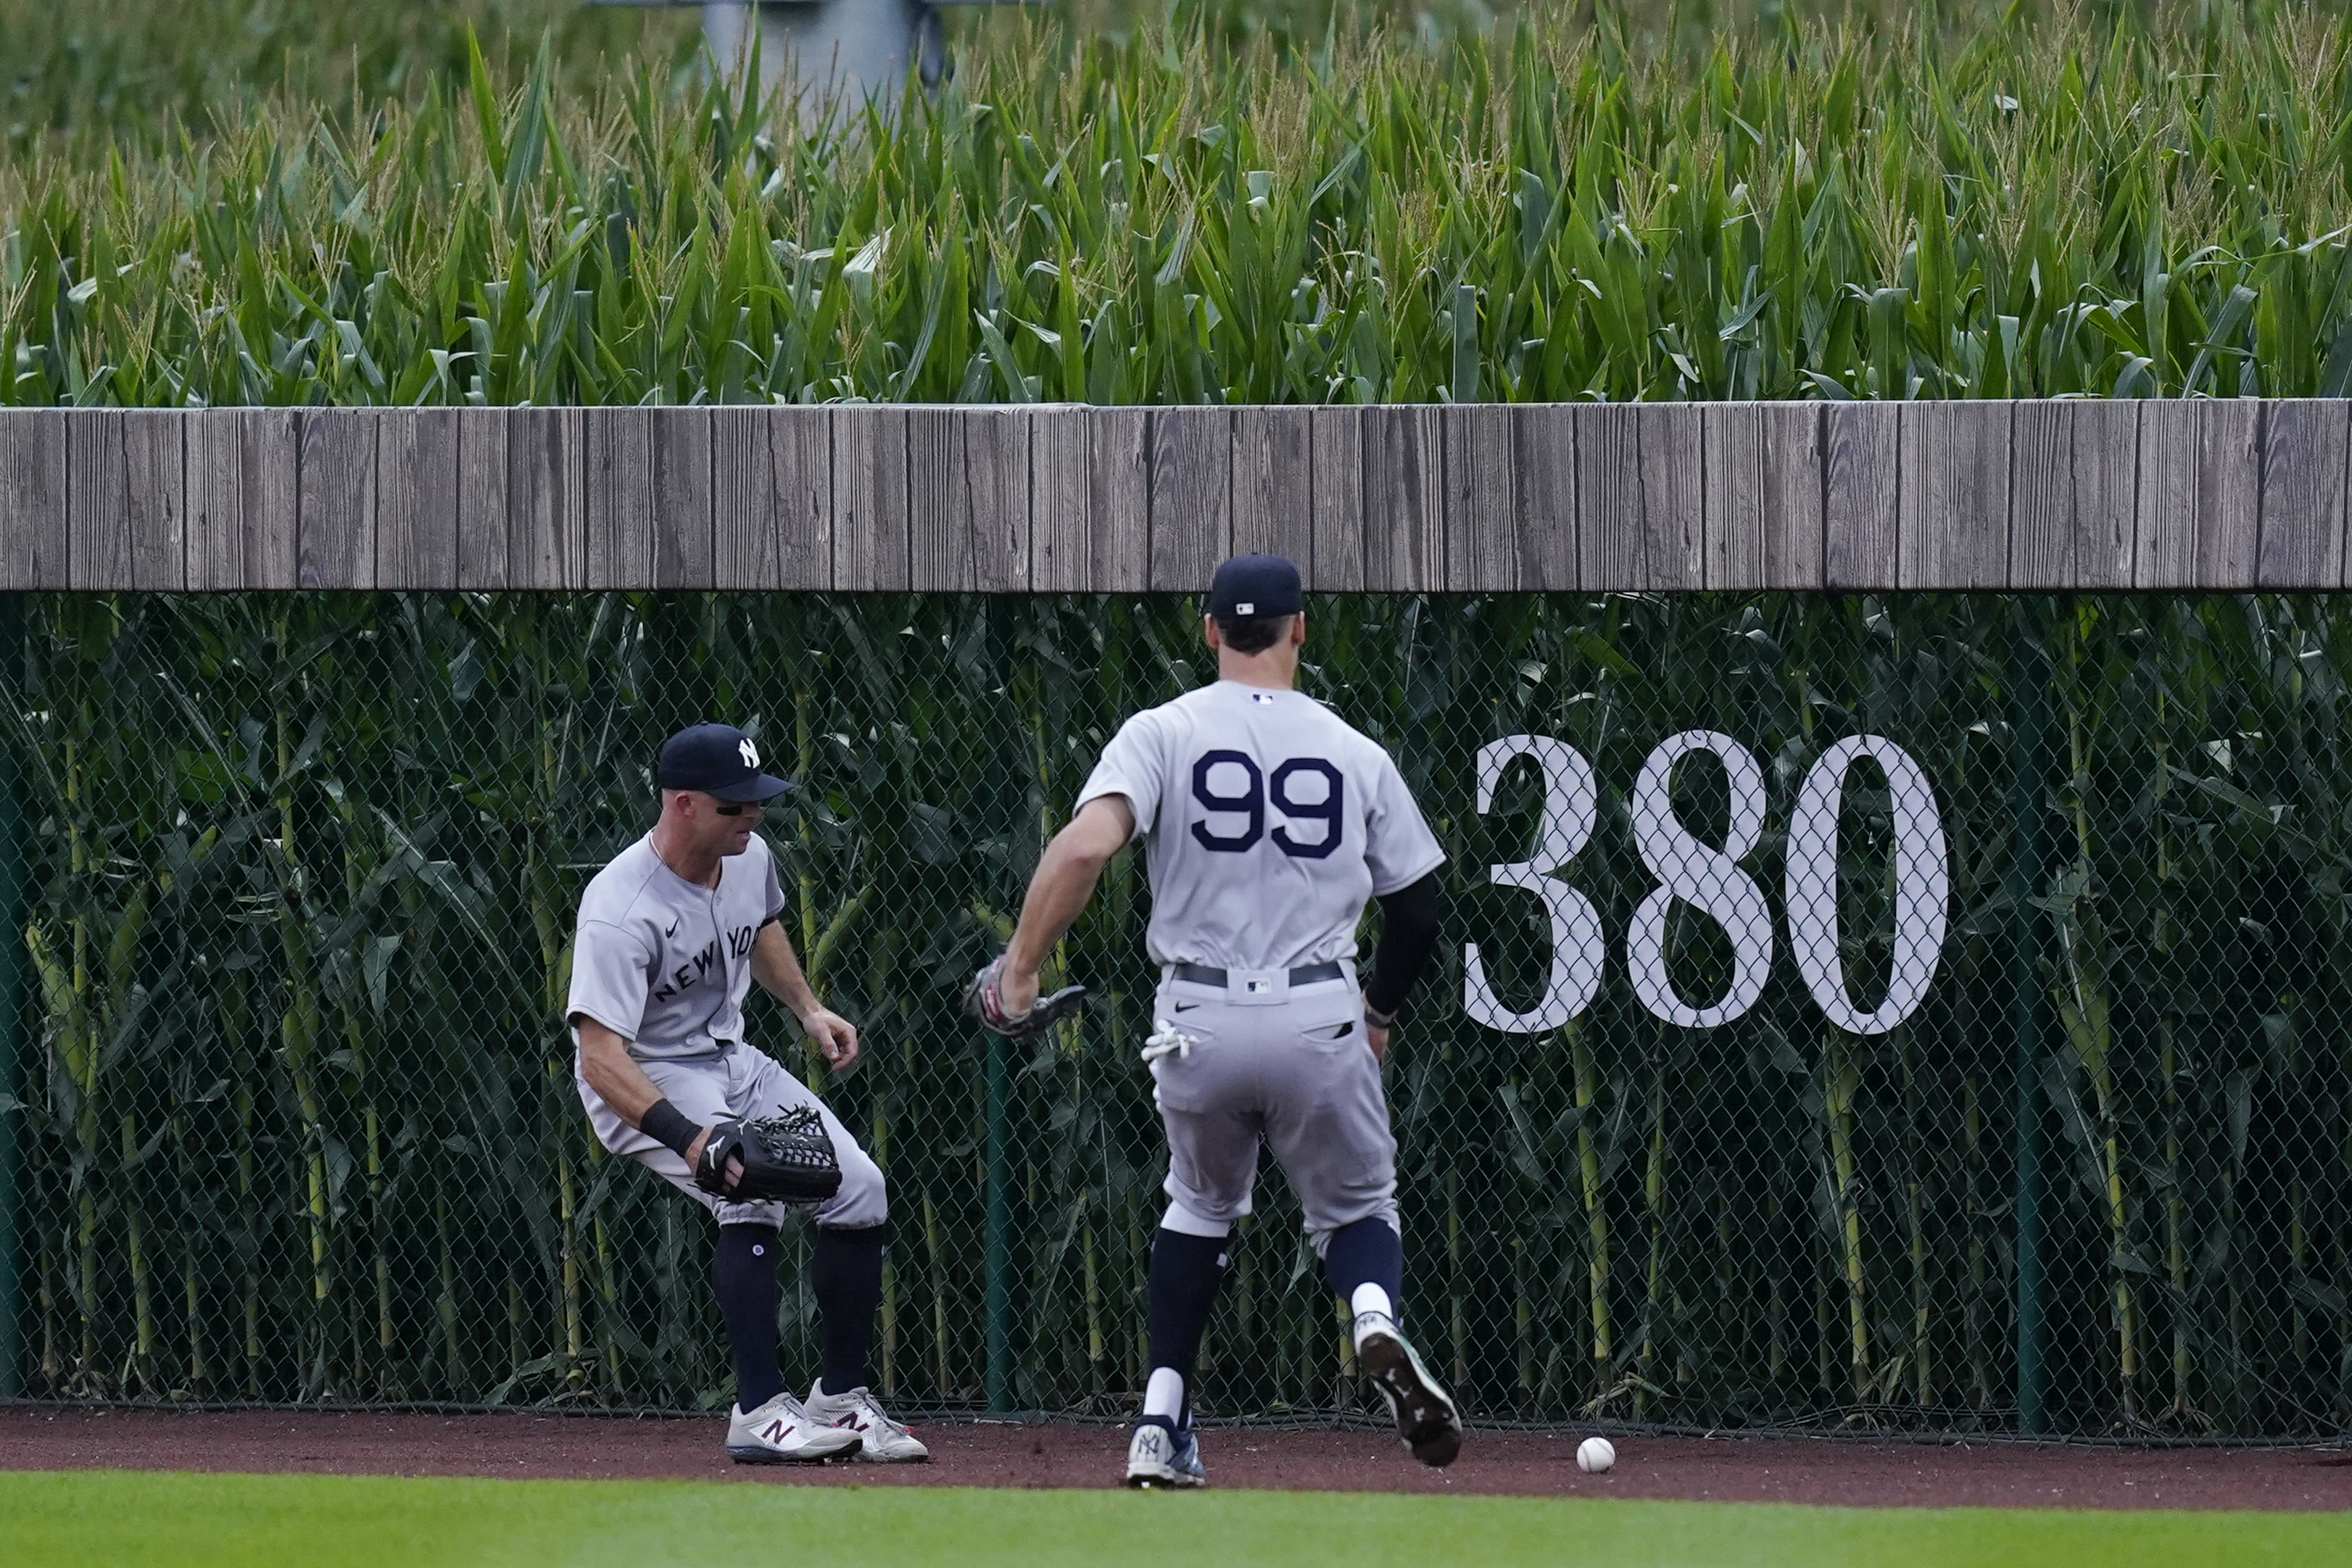 Field of Dreams Game spectacular despite Yankees' loss